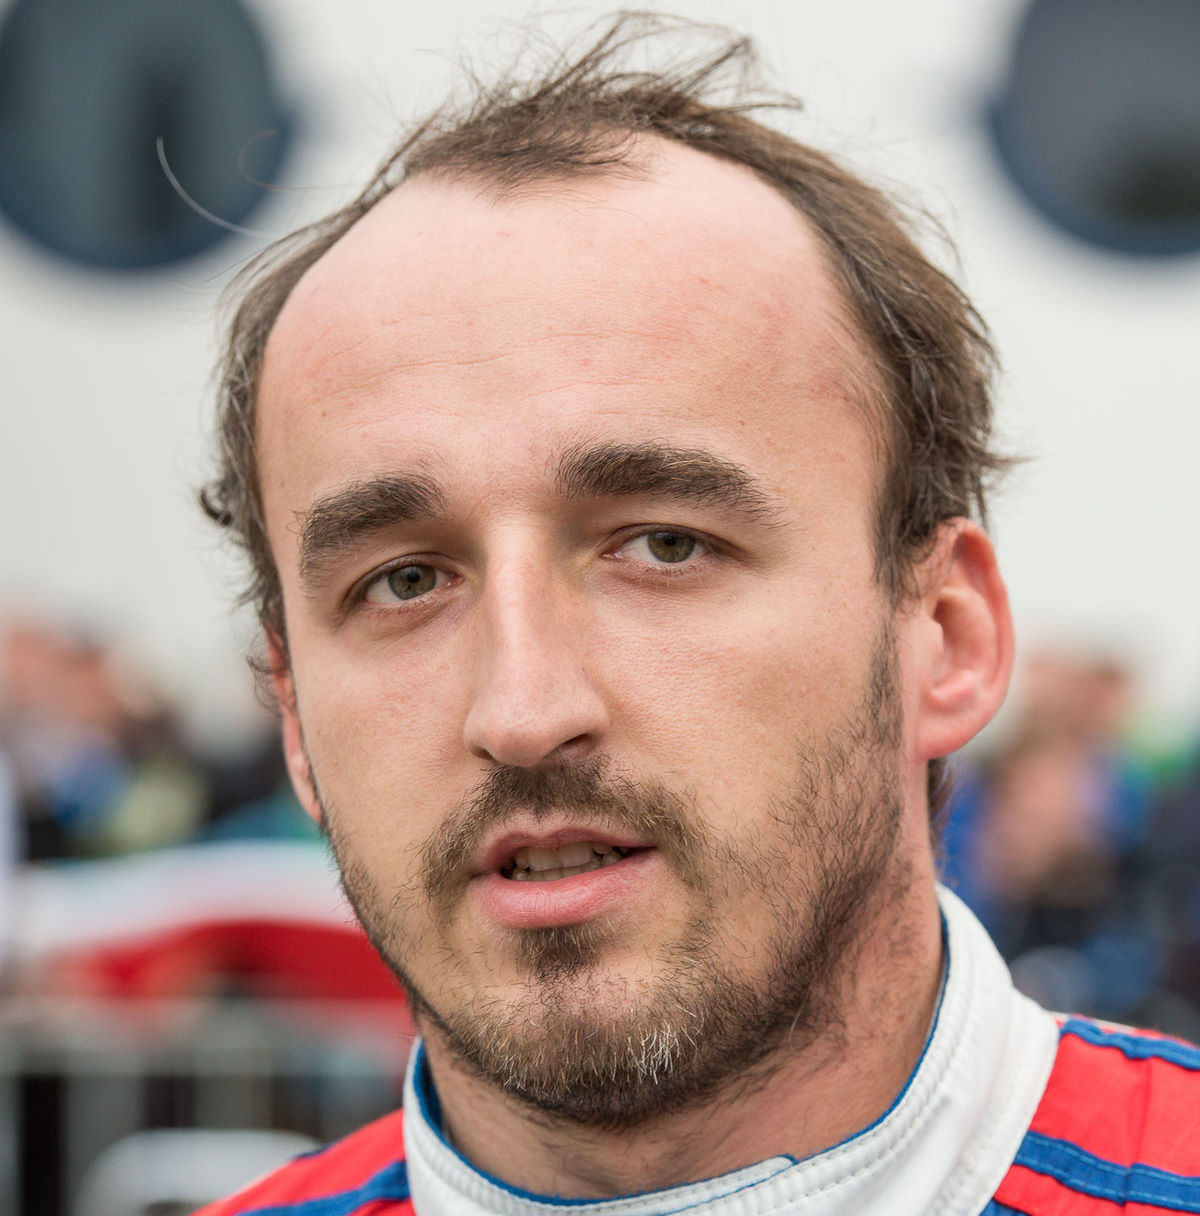 As a reserve driver drinking Kool-Aide at home or playing video games on the Williams Simulator, Kubica has plenty of time to do LeMans